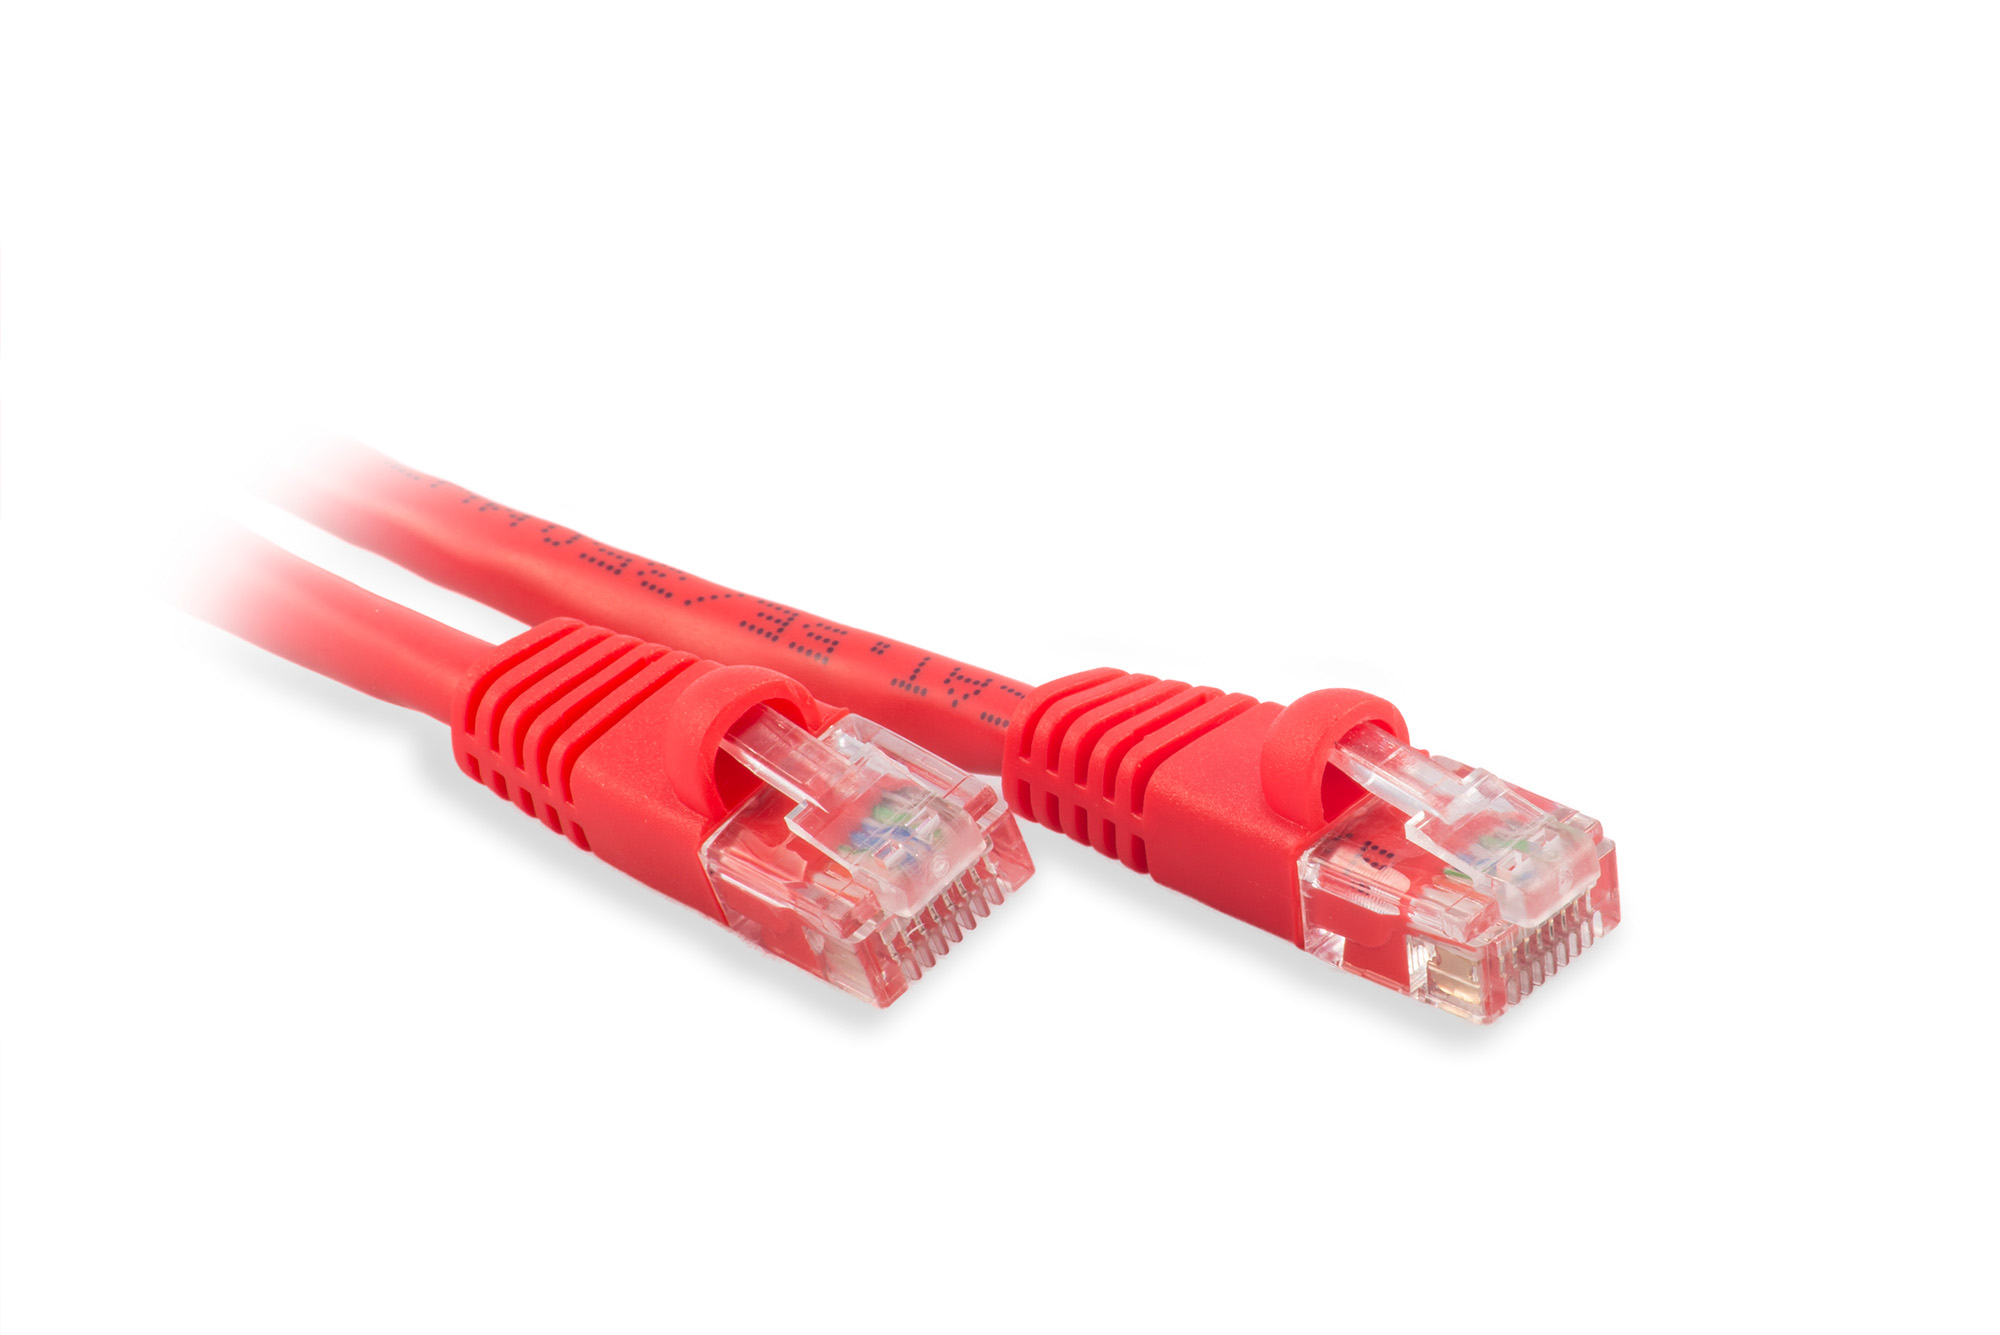 100ft Cat6 Ethernet Patch Cable - Red Color - Snagless Boot, Stranded, RJ45, 550Mhz, 24AWG